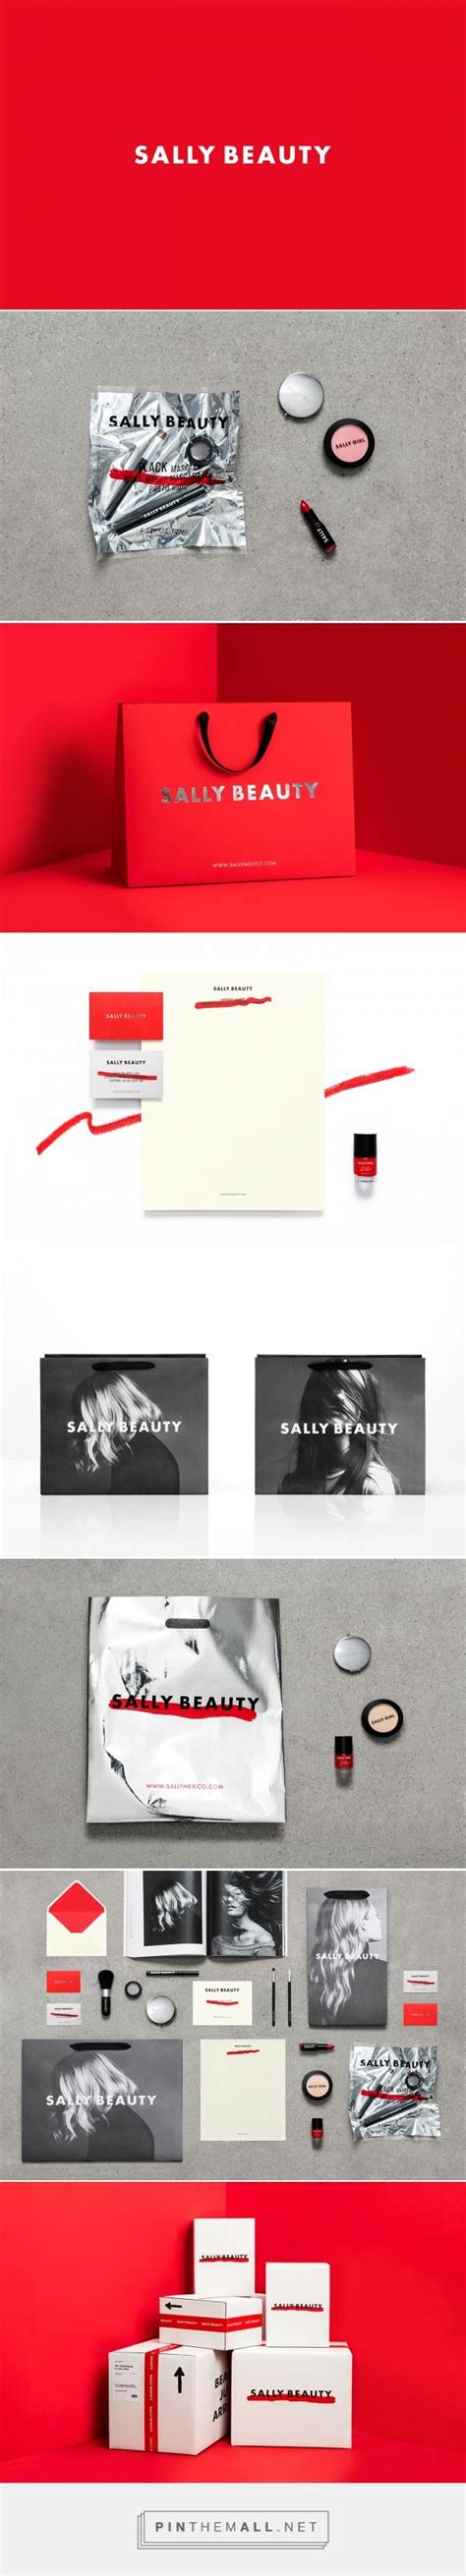 Art direction, branding and packaging for Sally Beauty on ...